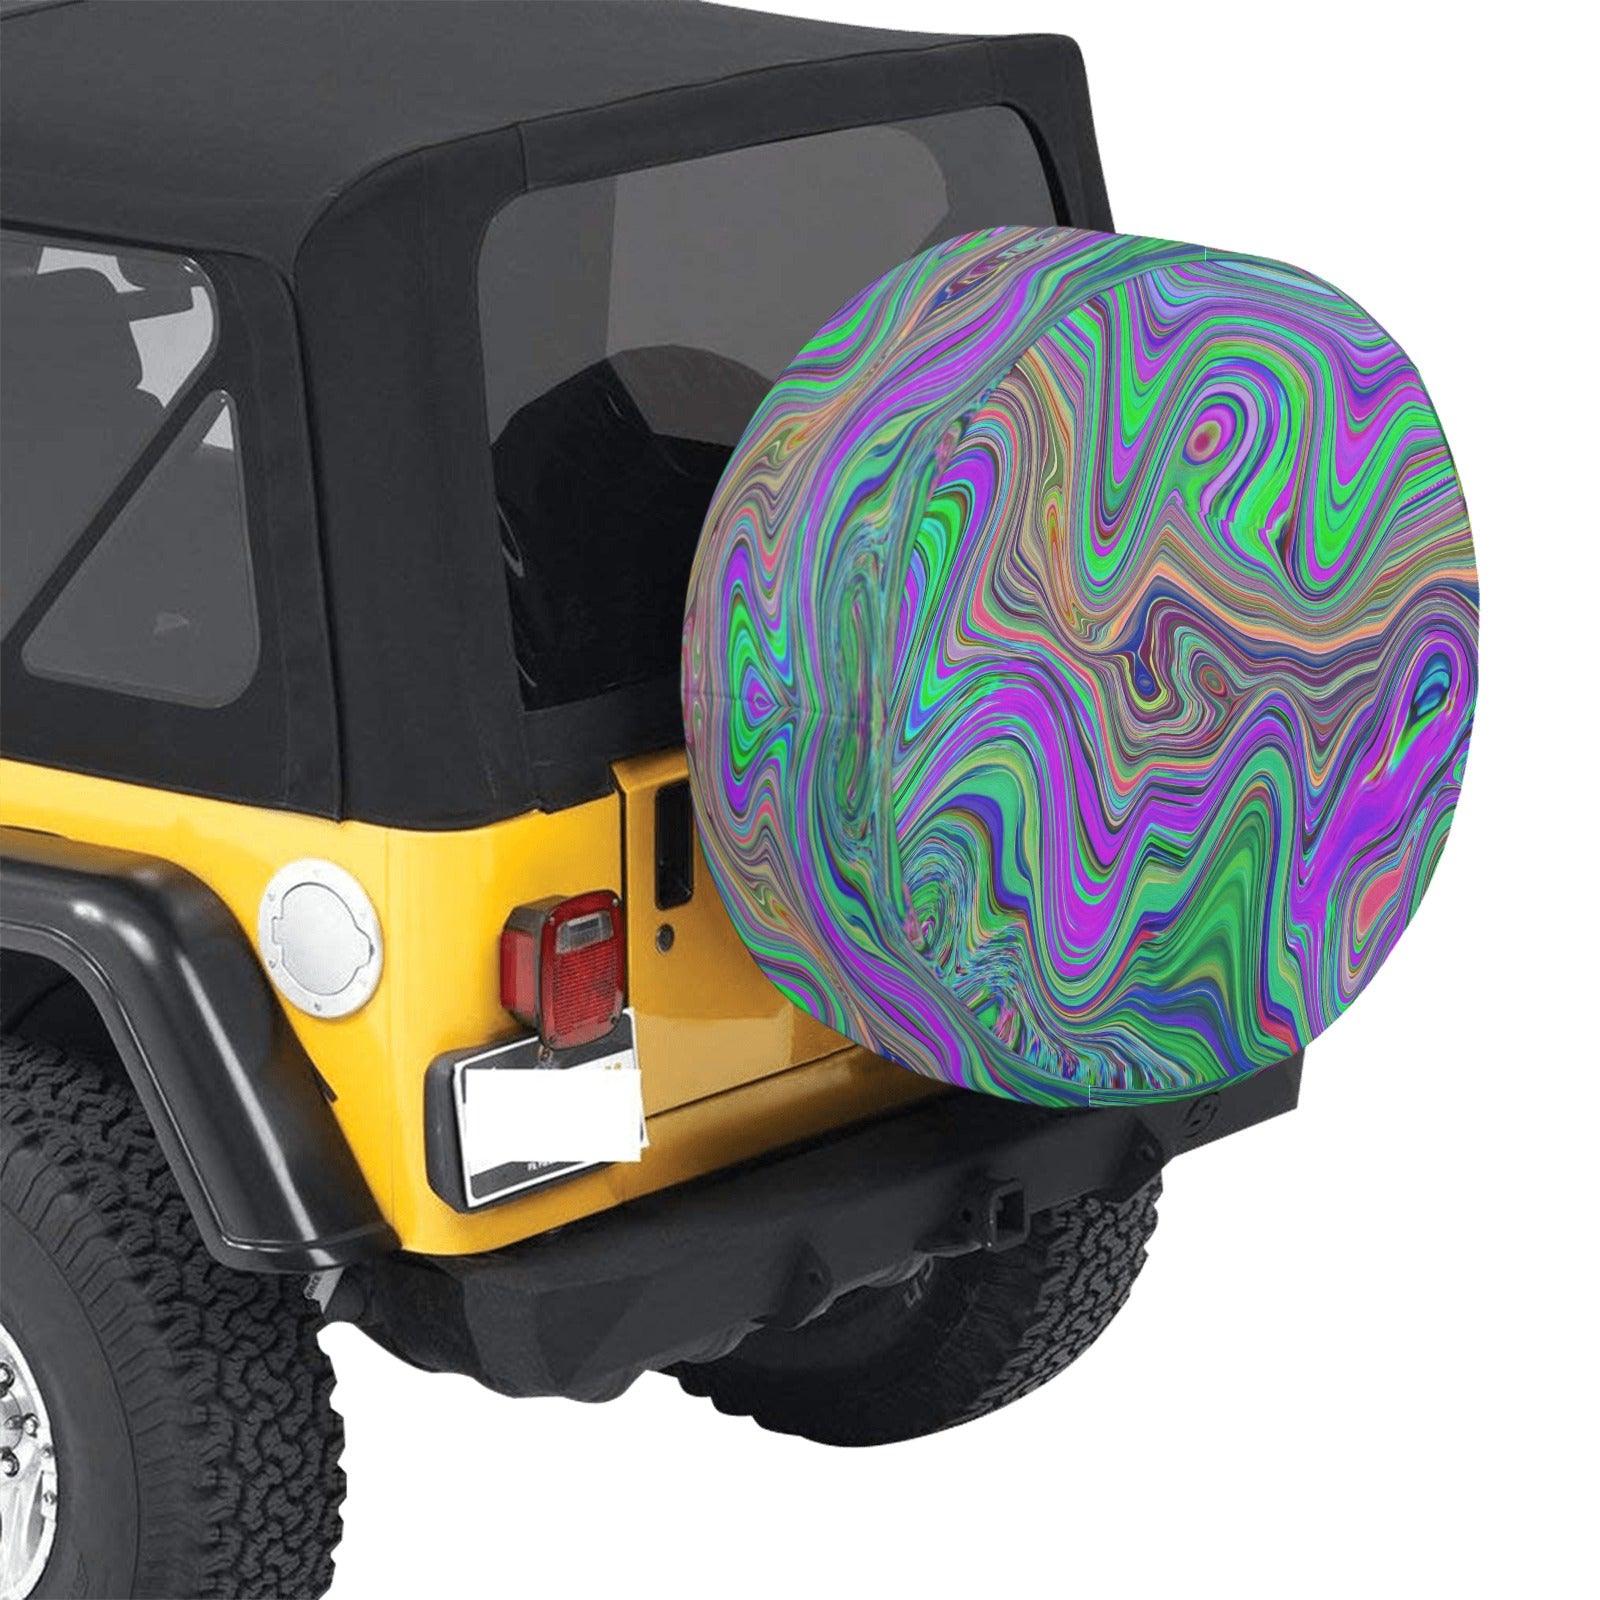 Spare Tire Covers, Trippy Lime Green and Purple Waves of Color - Large